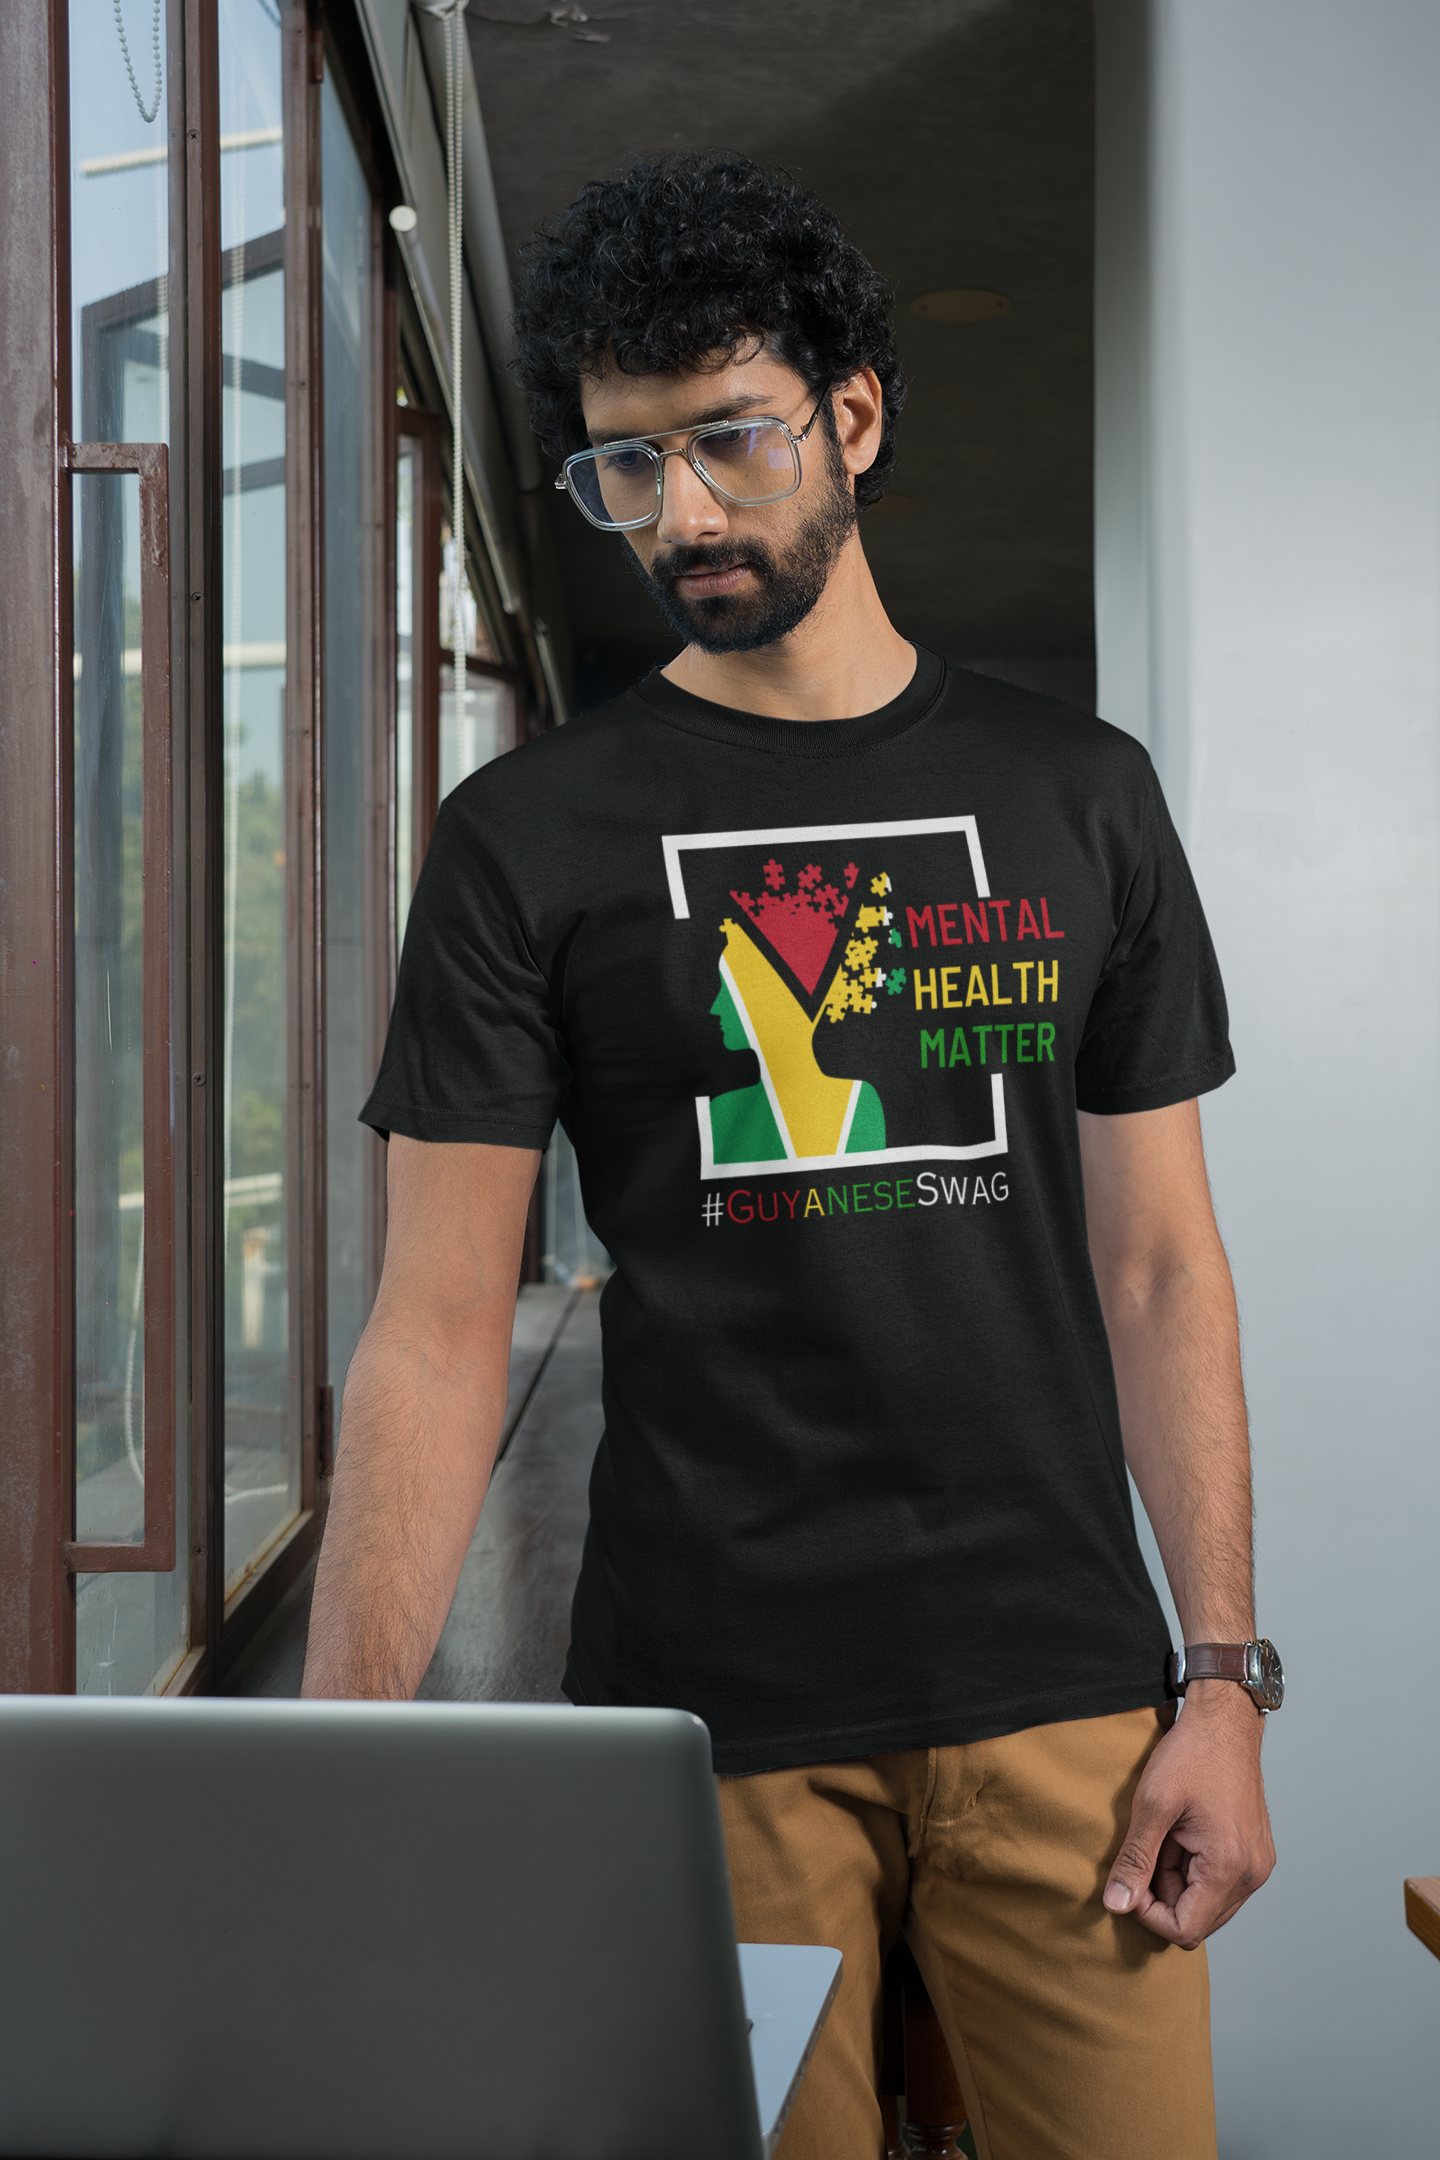 Guyanese Swag Mental Health Matters Unisex Softstyle T-Shirt